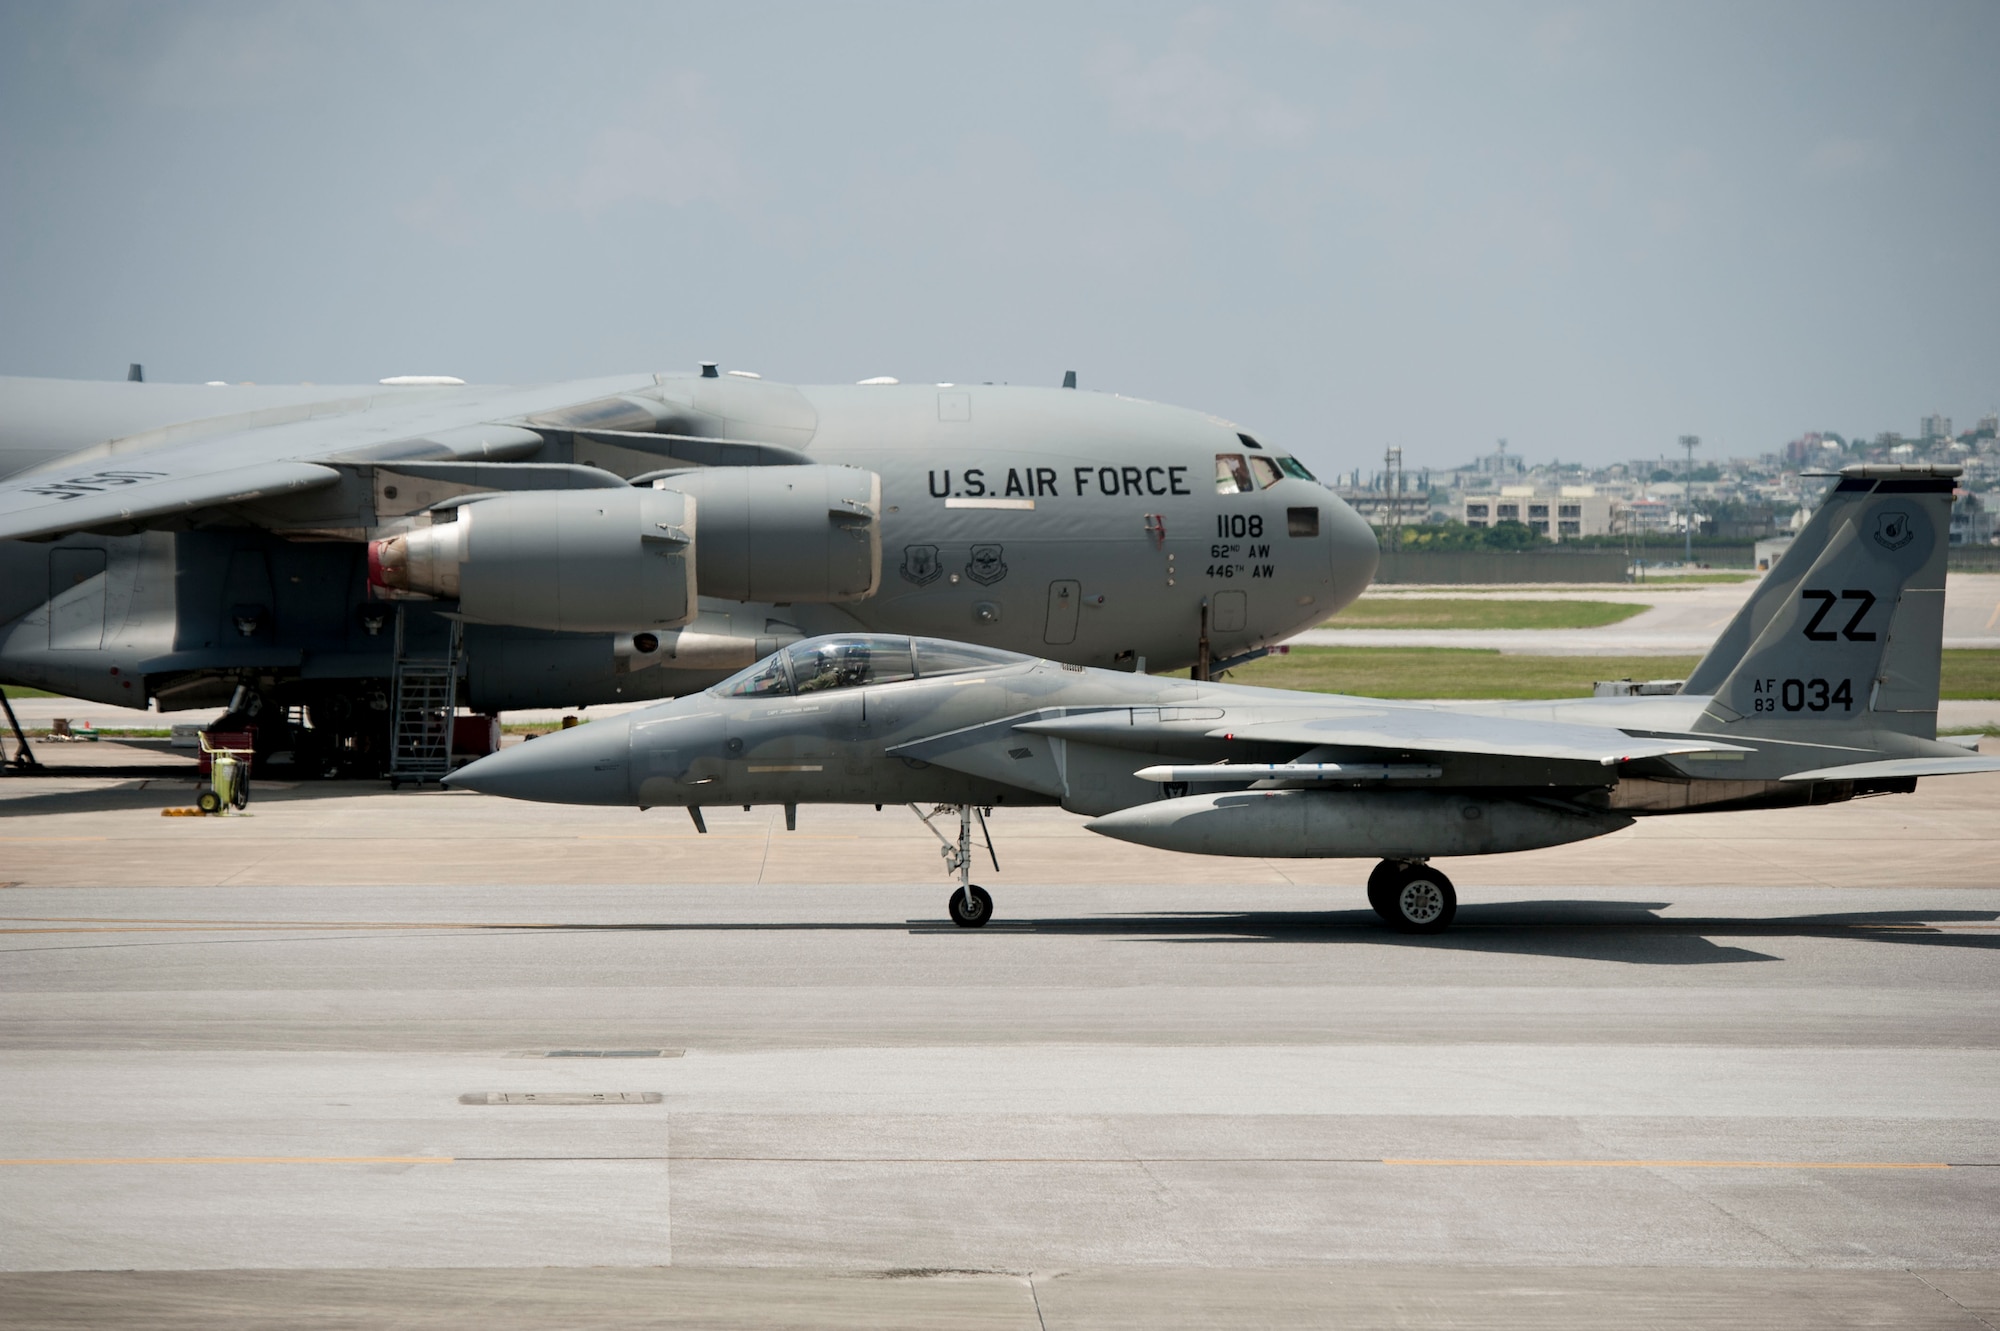 A 44th Fighter Squadron F-15 Eagle taxis past a C-17 Globemaster III assigned to Joint Base Lewis-McChord, Wash., July 28, 2016, at Kadena Air Base, Japan. Kadena supports Air Force commitments in the Pacific region as well as all U.S. and allied partner interests from all over the world. (U.S. Air Force photo by Senior Airman Peter Reft)